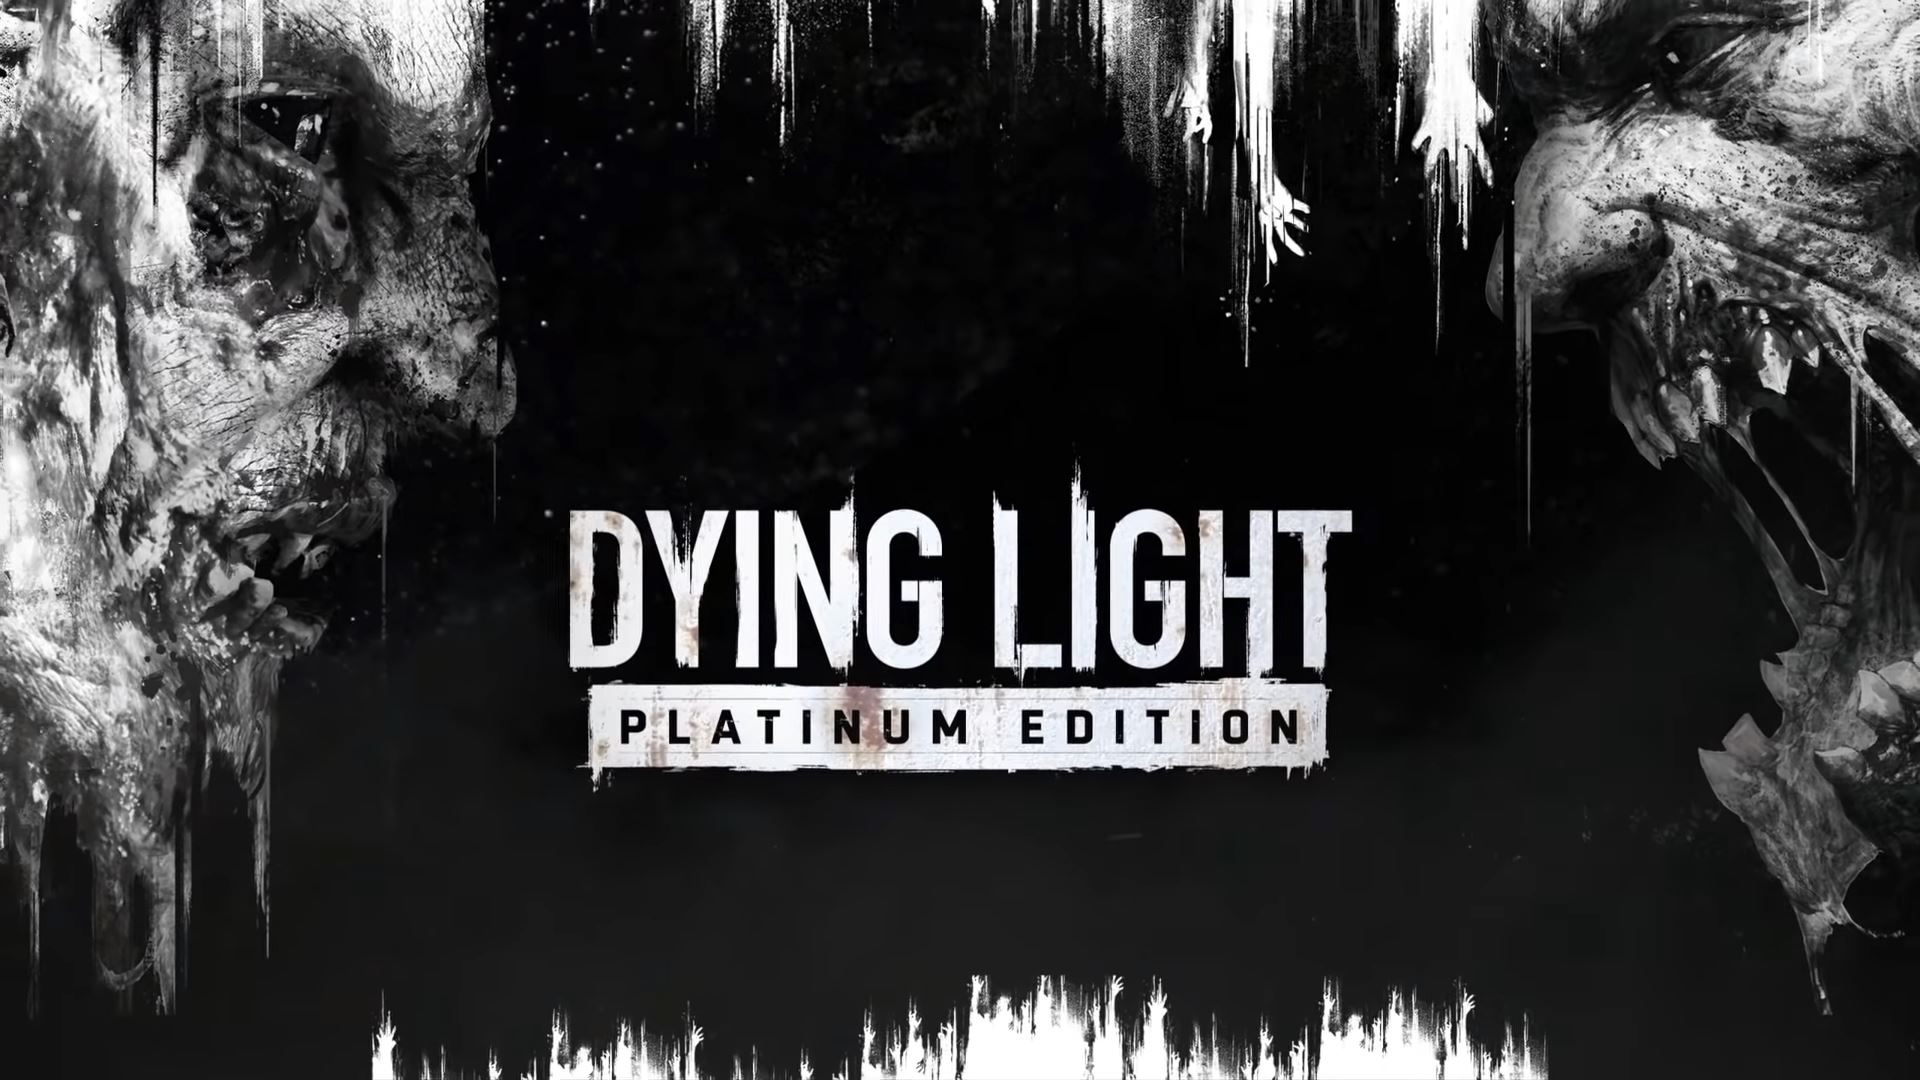 Dying Light – Platinum Edition version 1.0.3 patch-notes